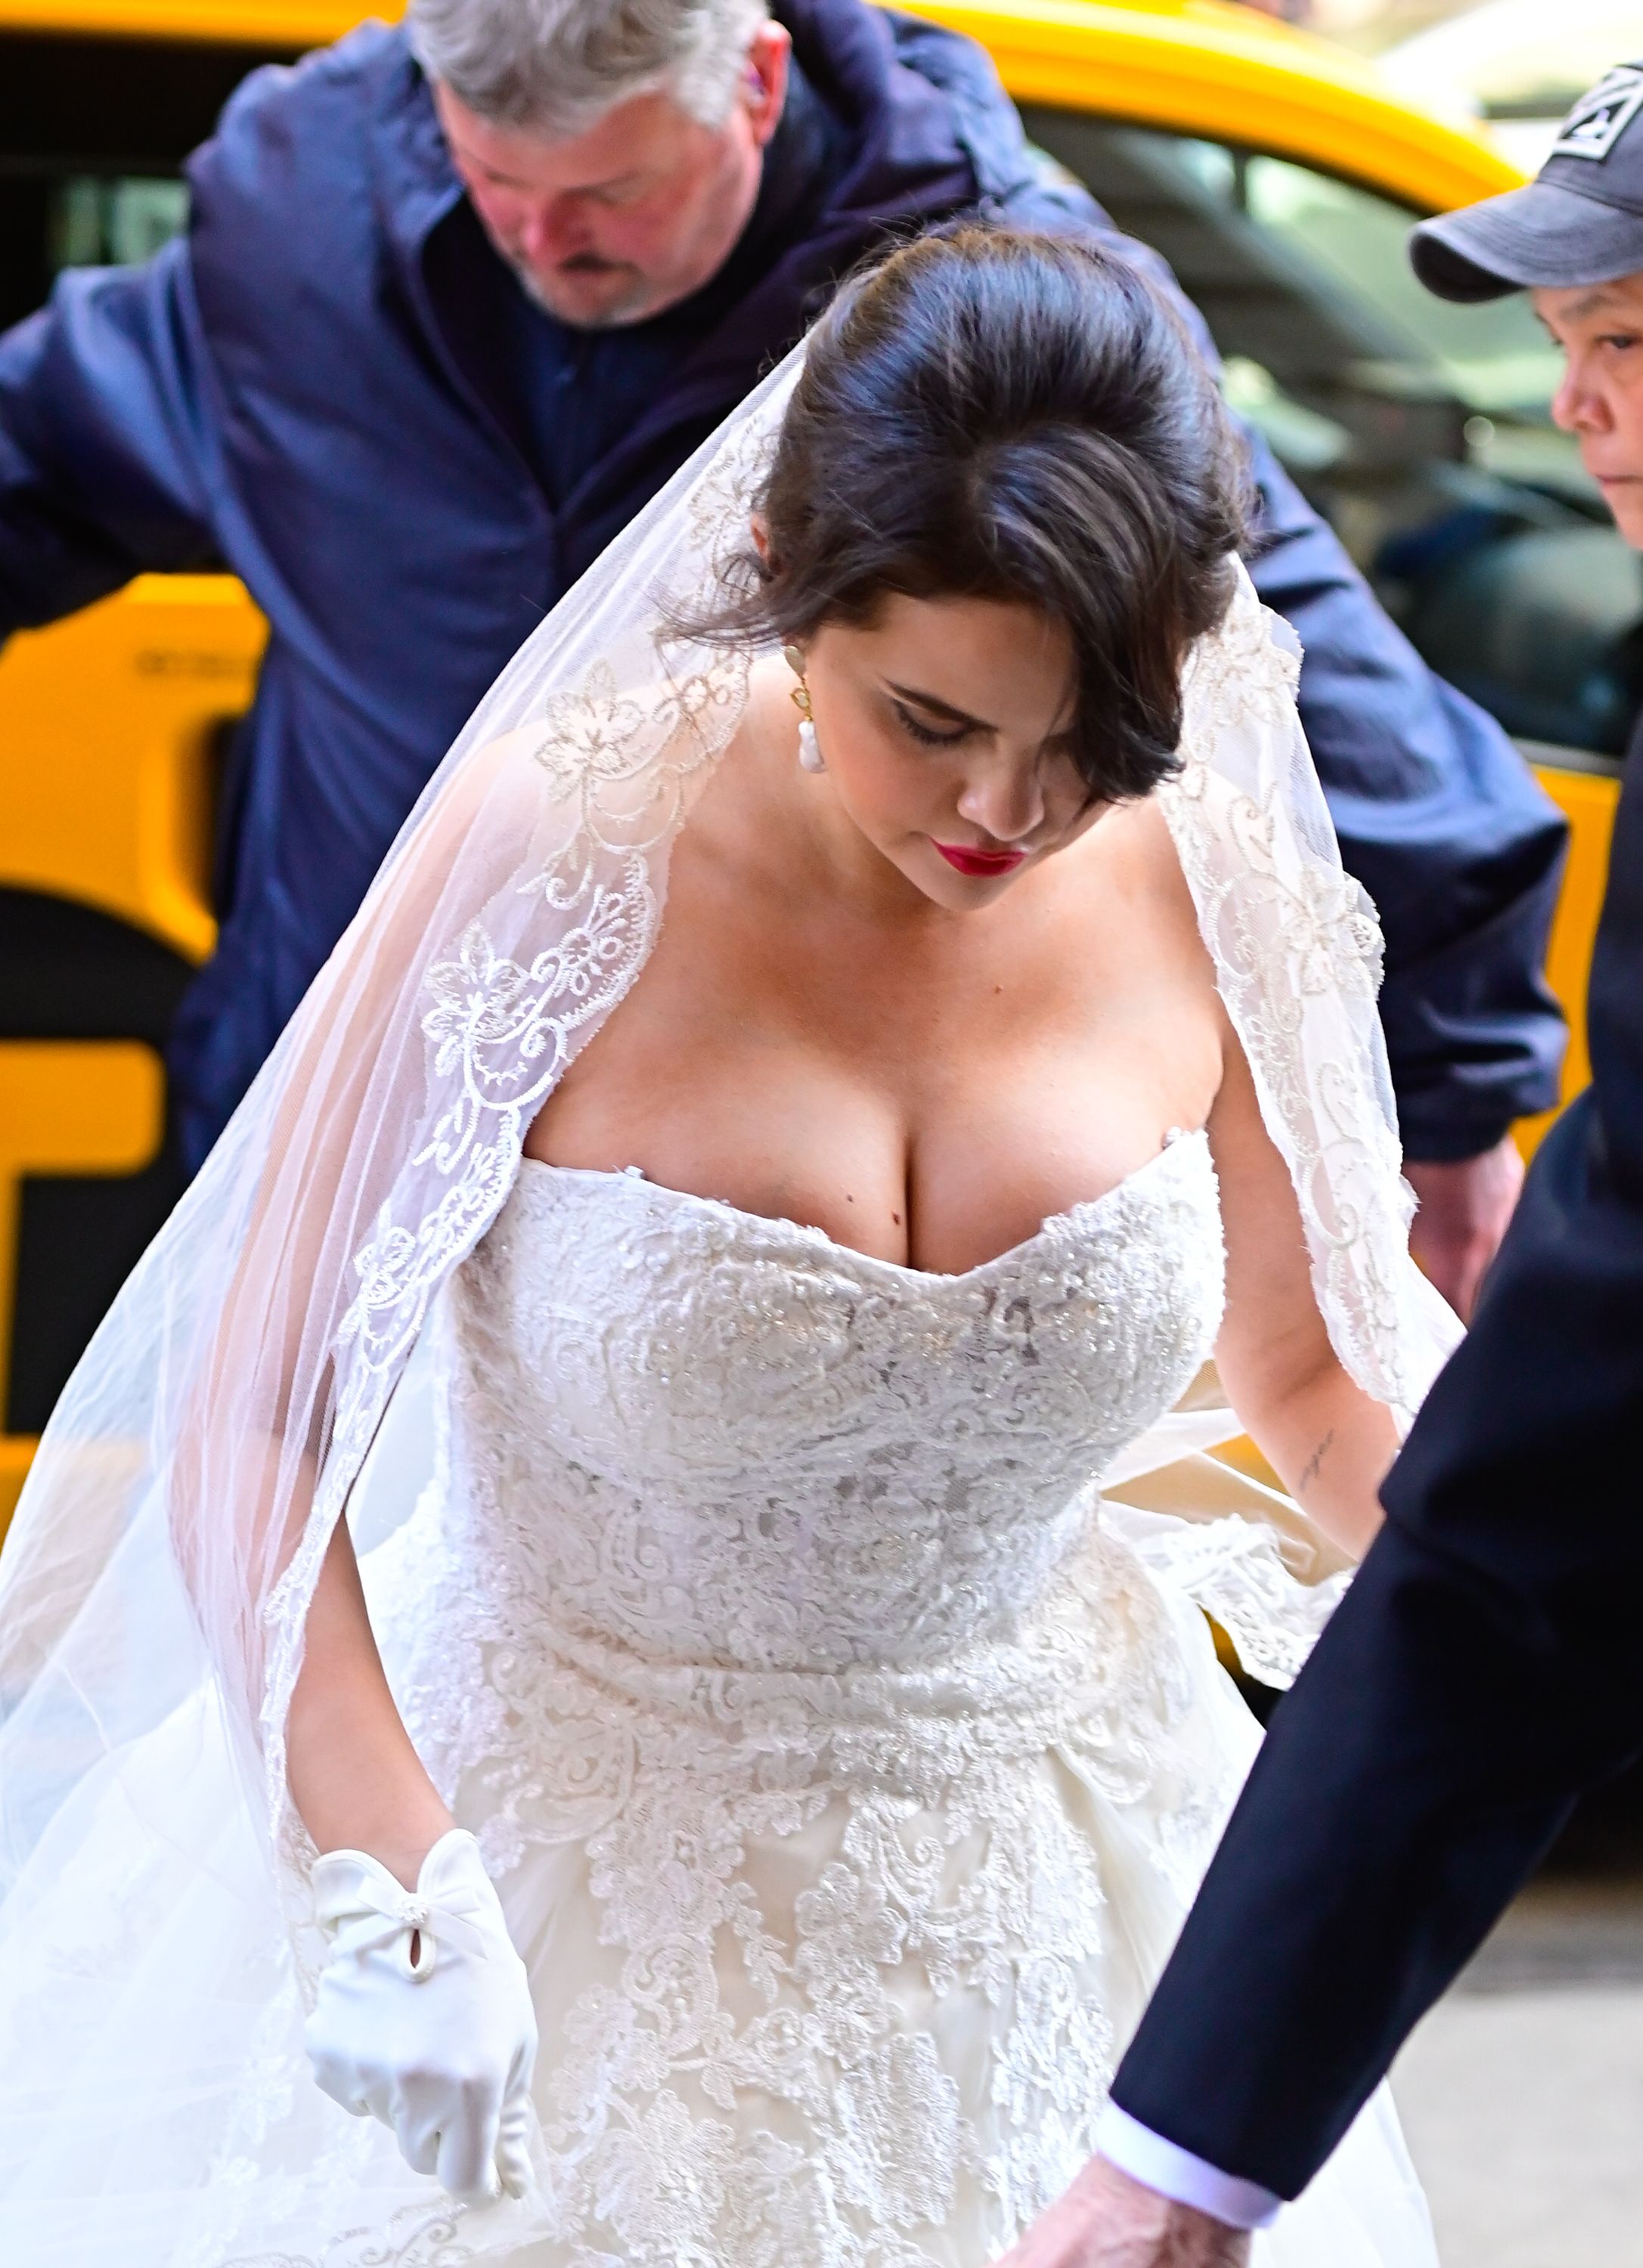 See Selena Gomez in a Wedding Dress in NYC for Only Murders in the Building pic